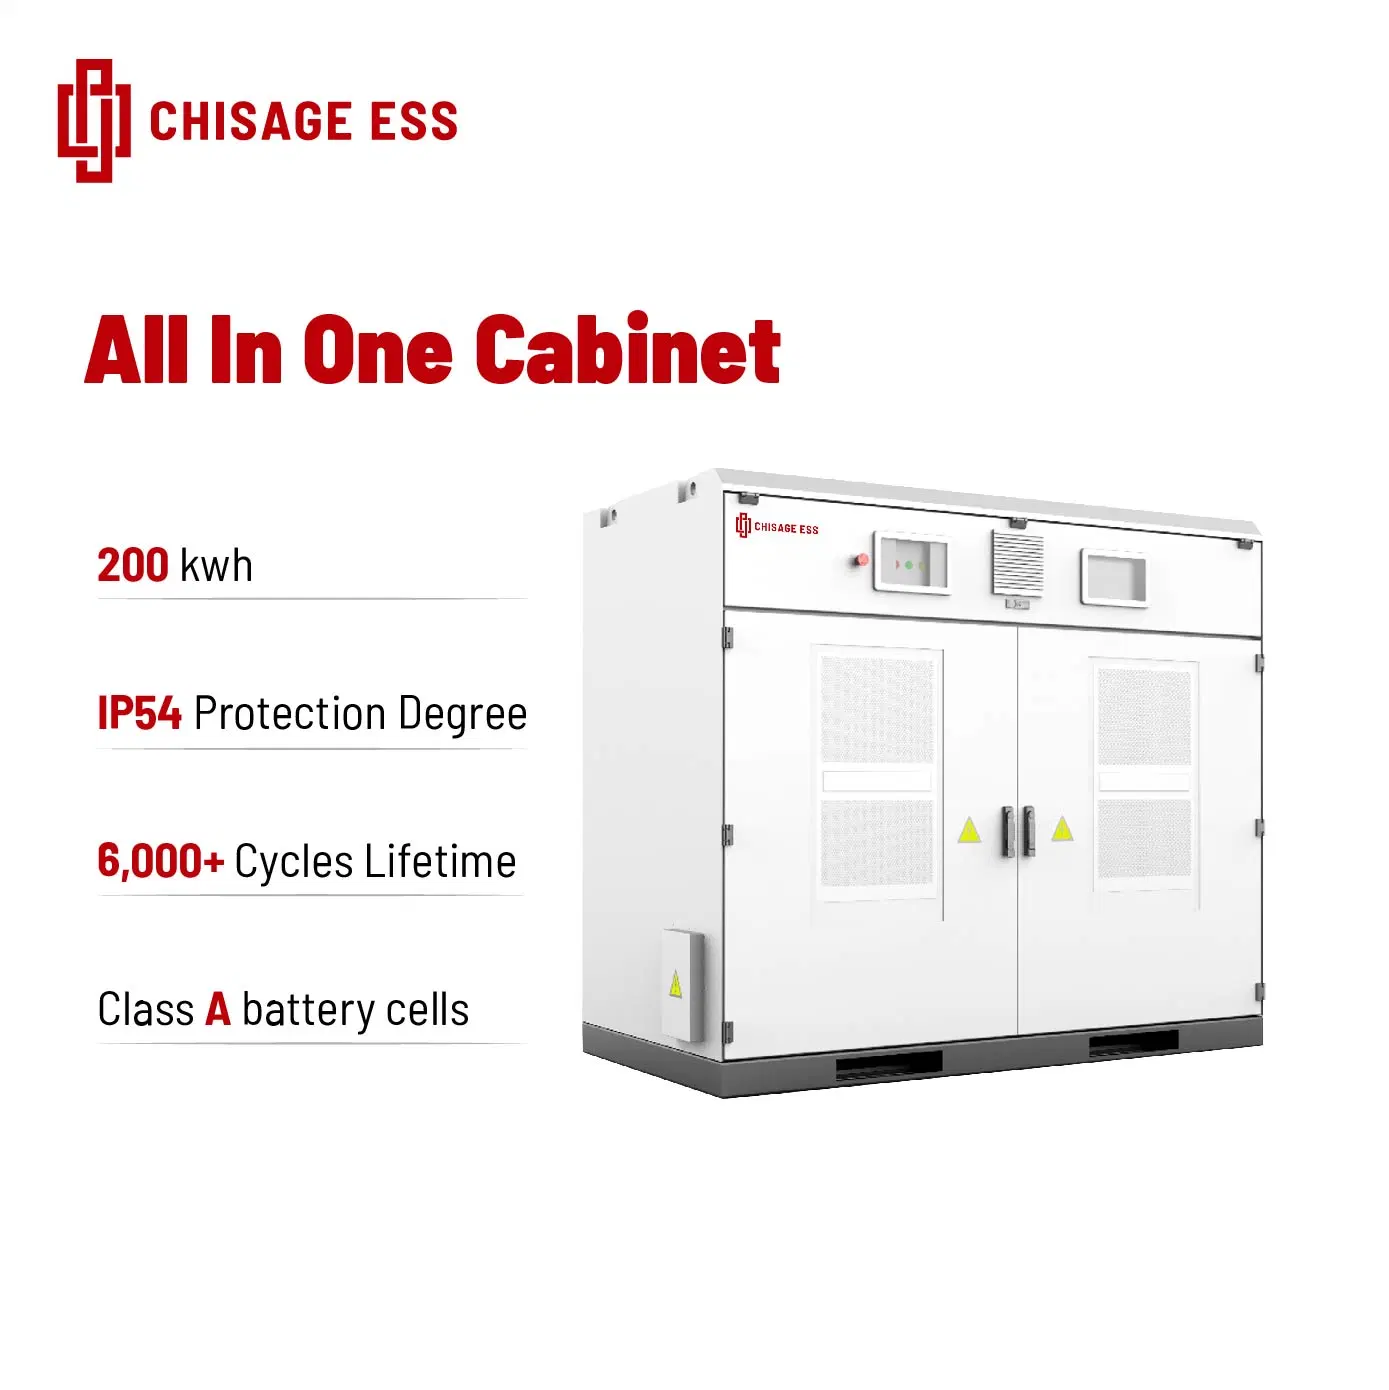 High Efficiency Play & Plug 100kw Rated Power 200kwh Energy Storage System Cabinet